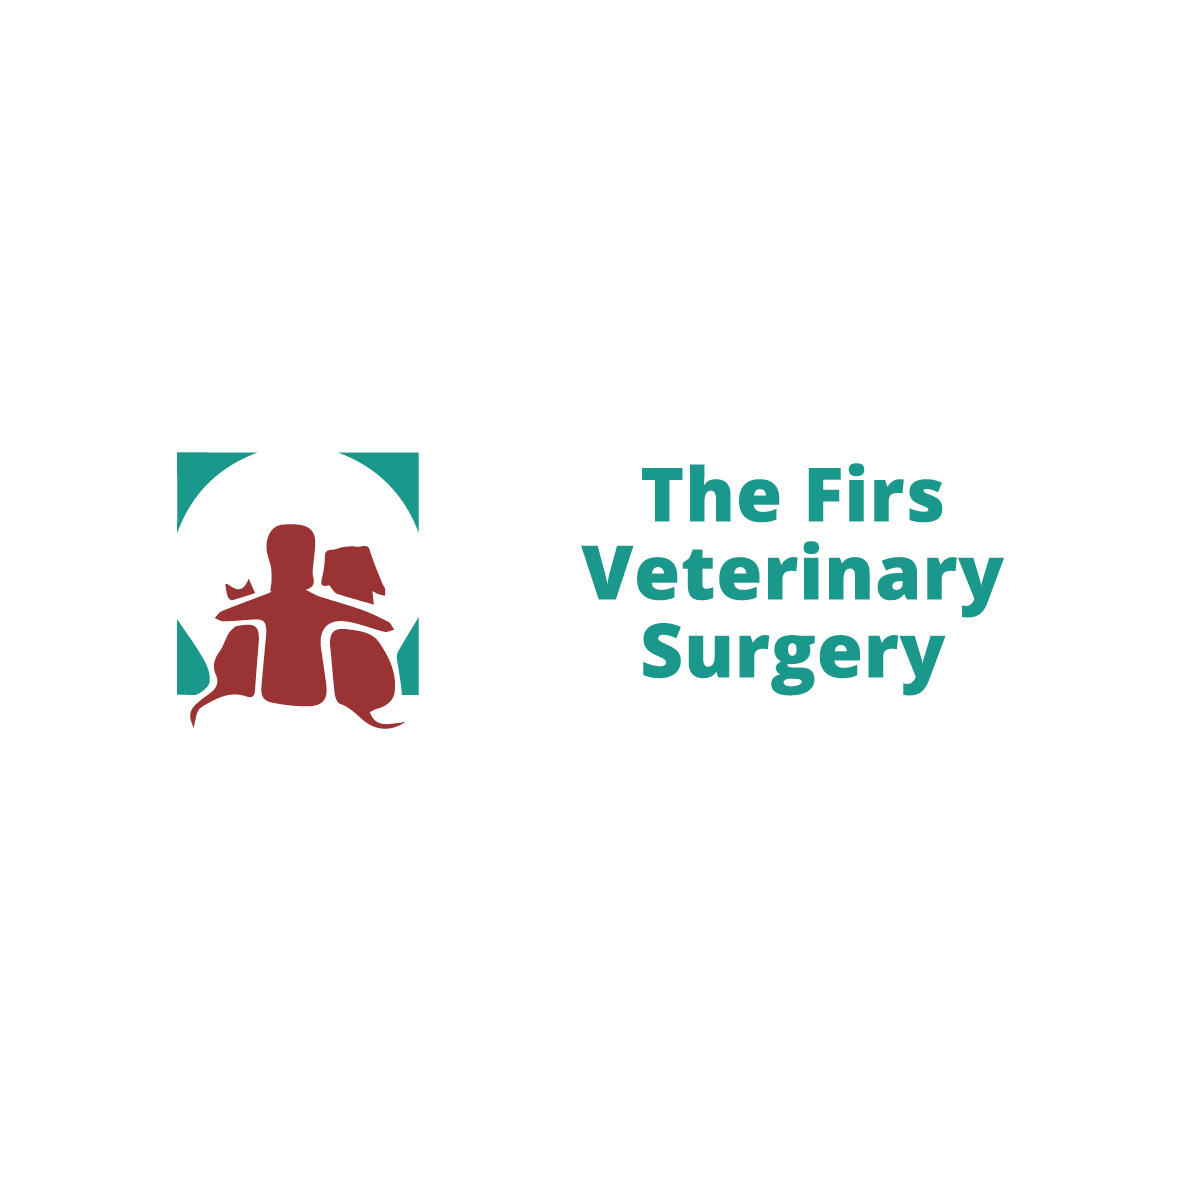 Willows Veterinary Group - The Firs Veterinary Surgery Kelsall 01829 751500